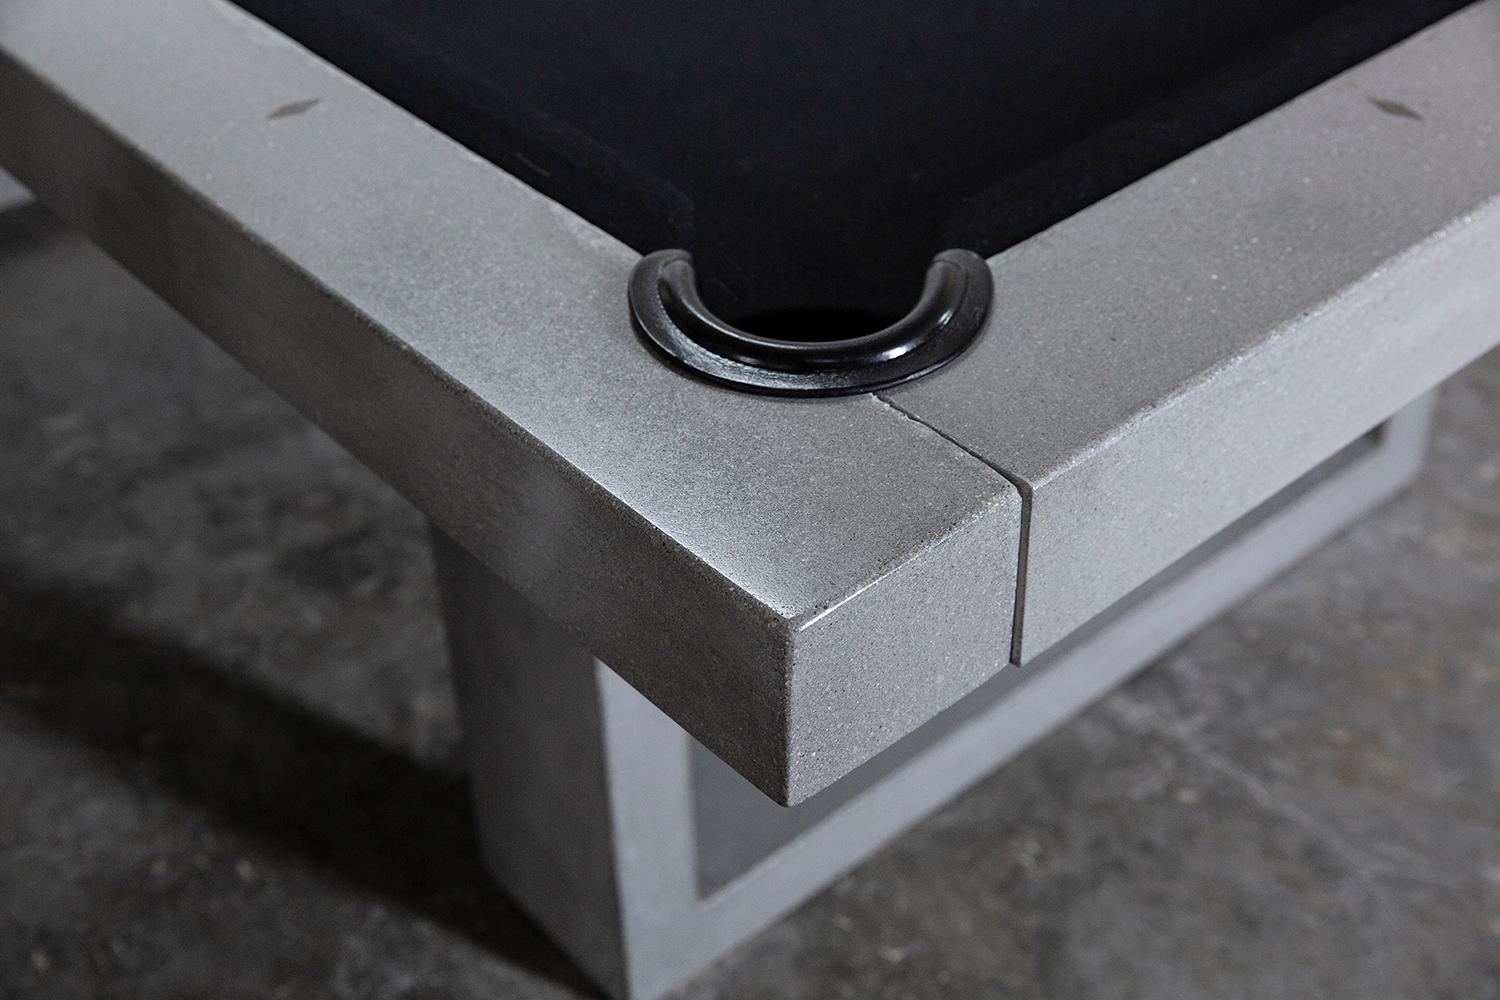 Brutalist James de Wulf 7' Concrete Pool Table and Cue Rack, Available Now